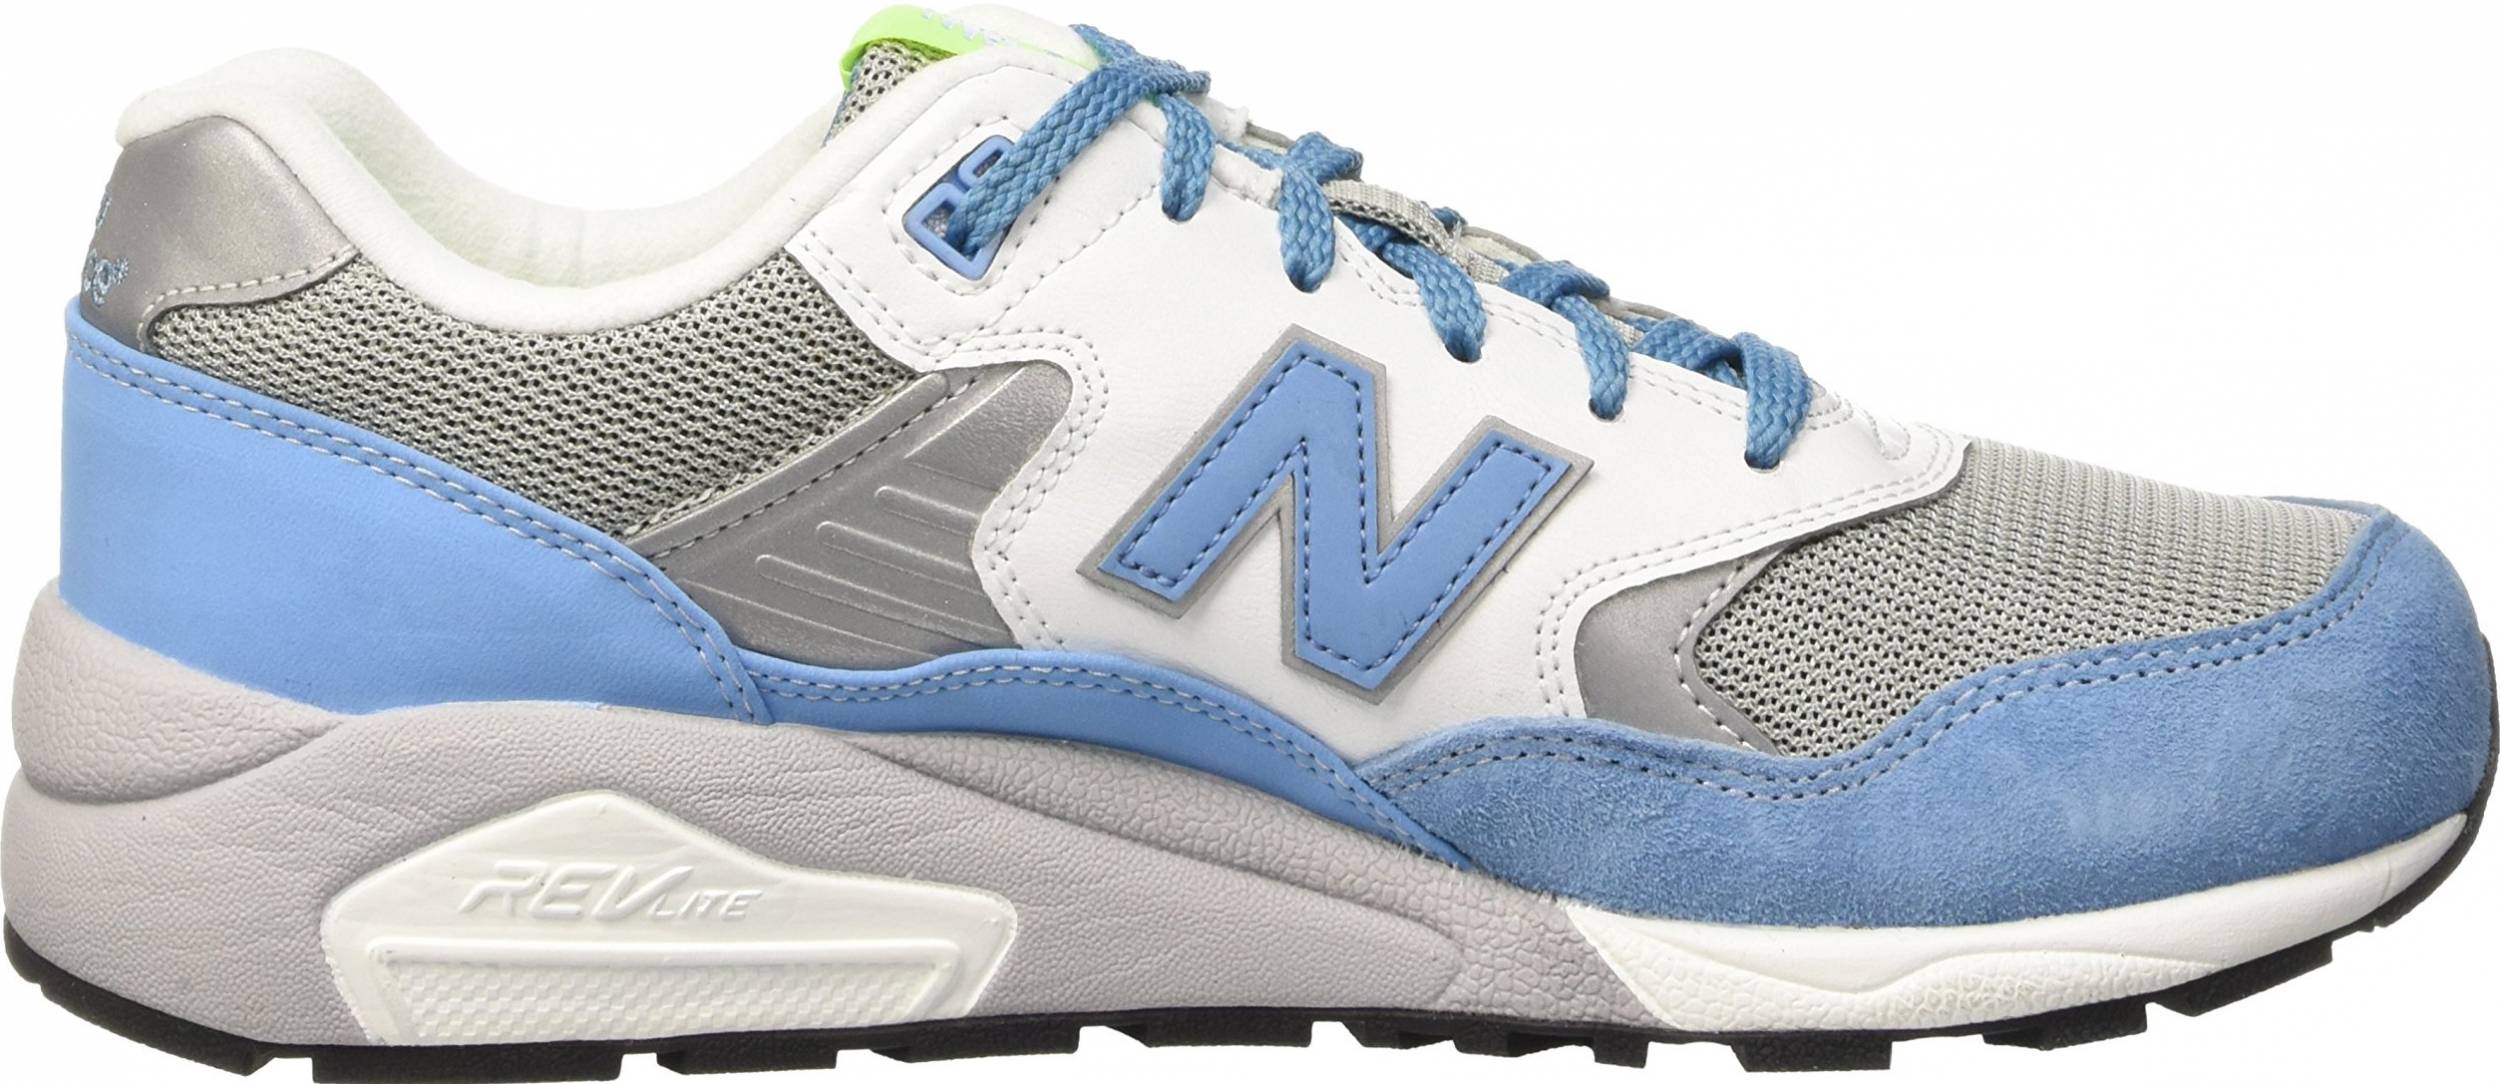 New Balance 580 sneakers (only £78) | RunRepeat